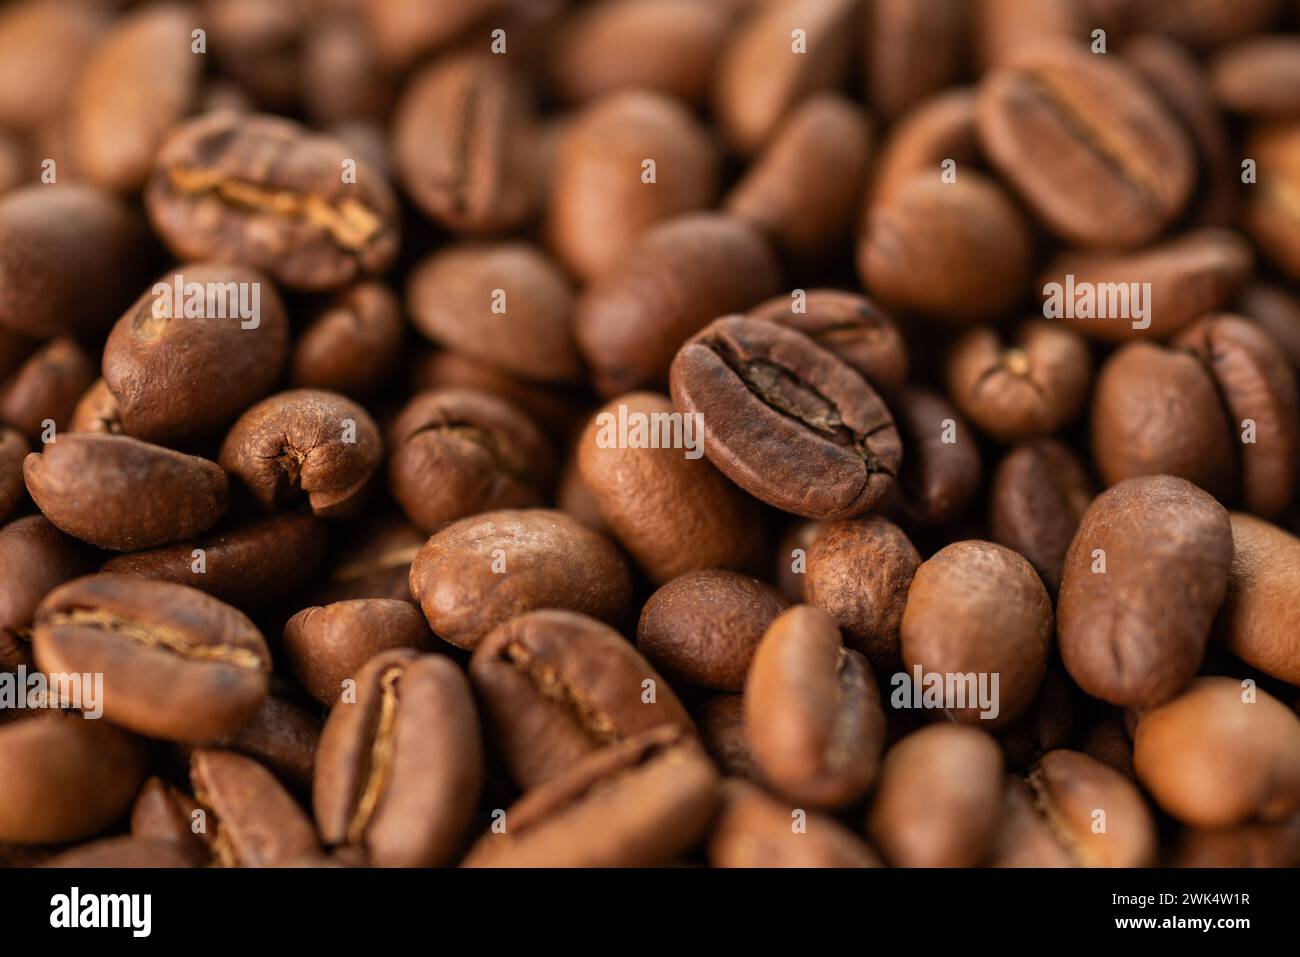 Brown roasted coffe beans, close up image. High quality photo Stock Photo